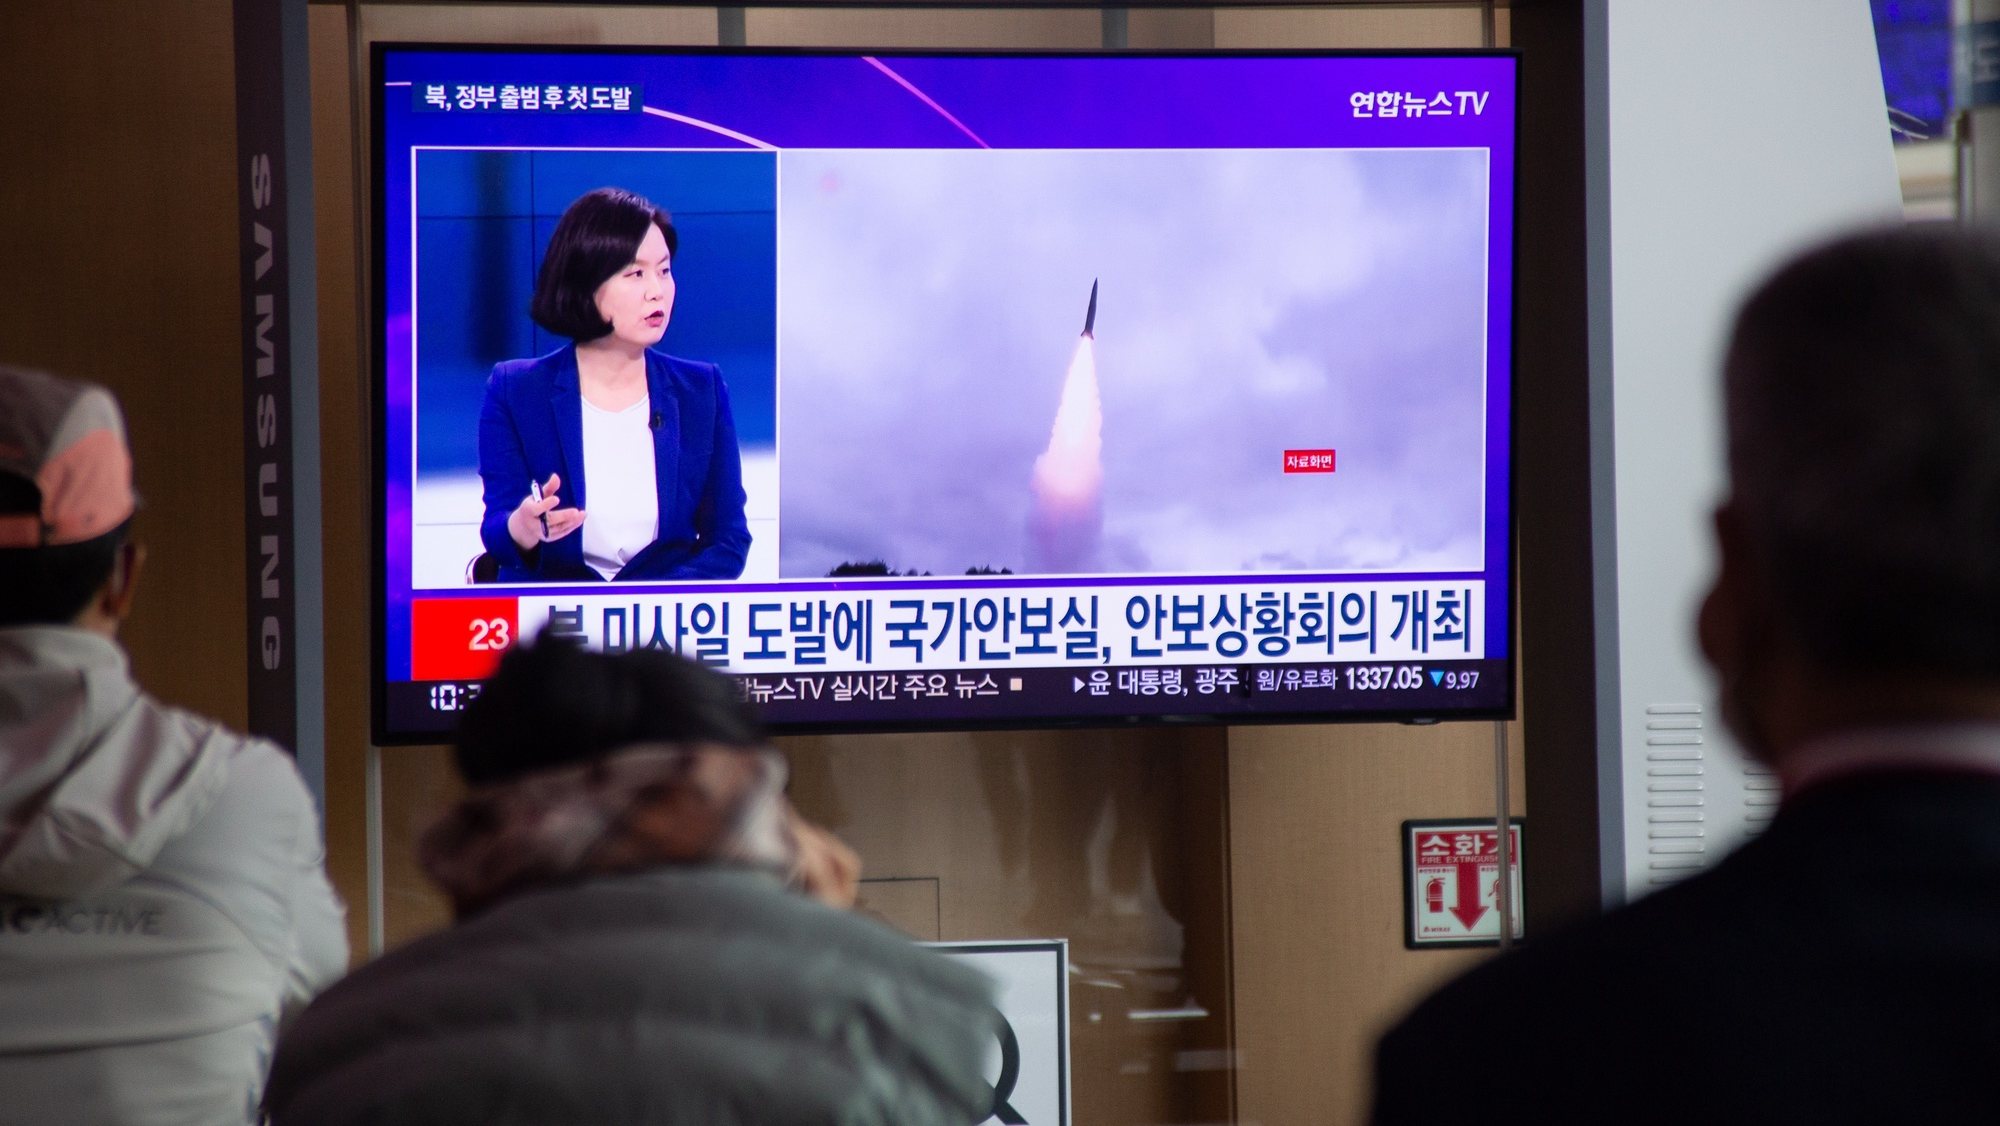 epa09943642 People watch a news report on a North Korean missile launch at a station in Seoul, South Korea, 13 May 2022. According to South Korea&#039;s Joint Chiefs of Staff (JCS), North Korea fired three ballistic missile toward the East Sea on 12 May.  EPA/JEON HEON-KYUN